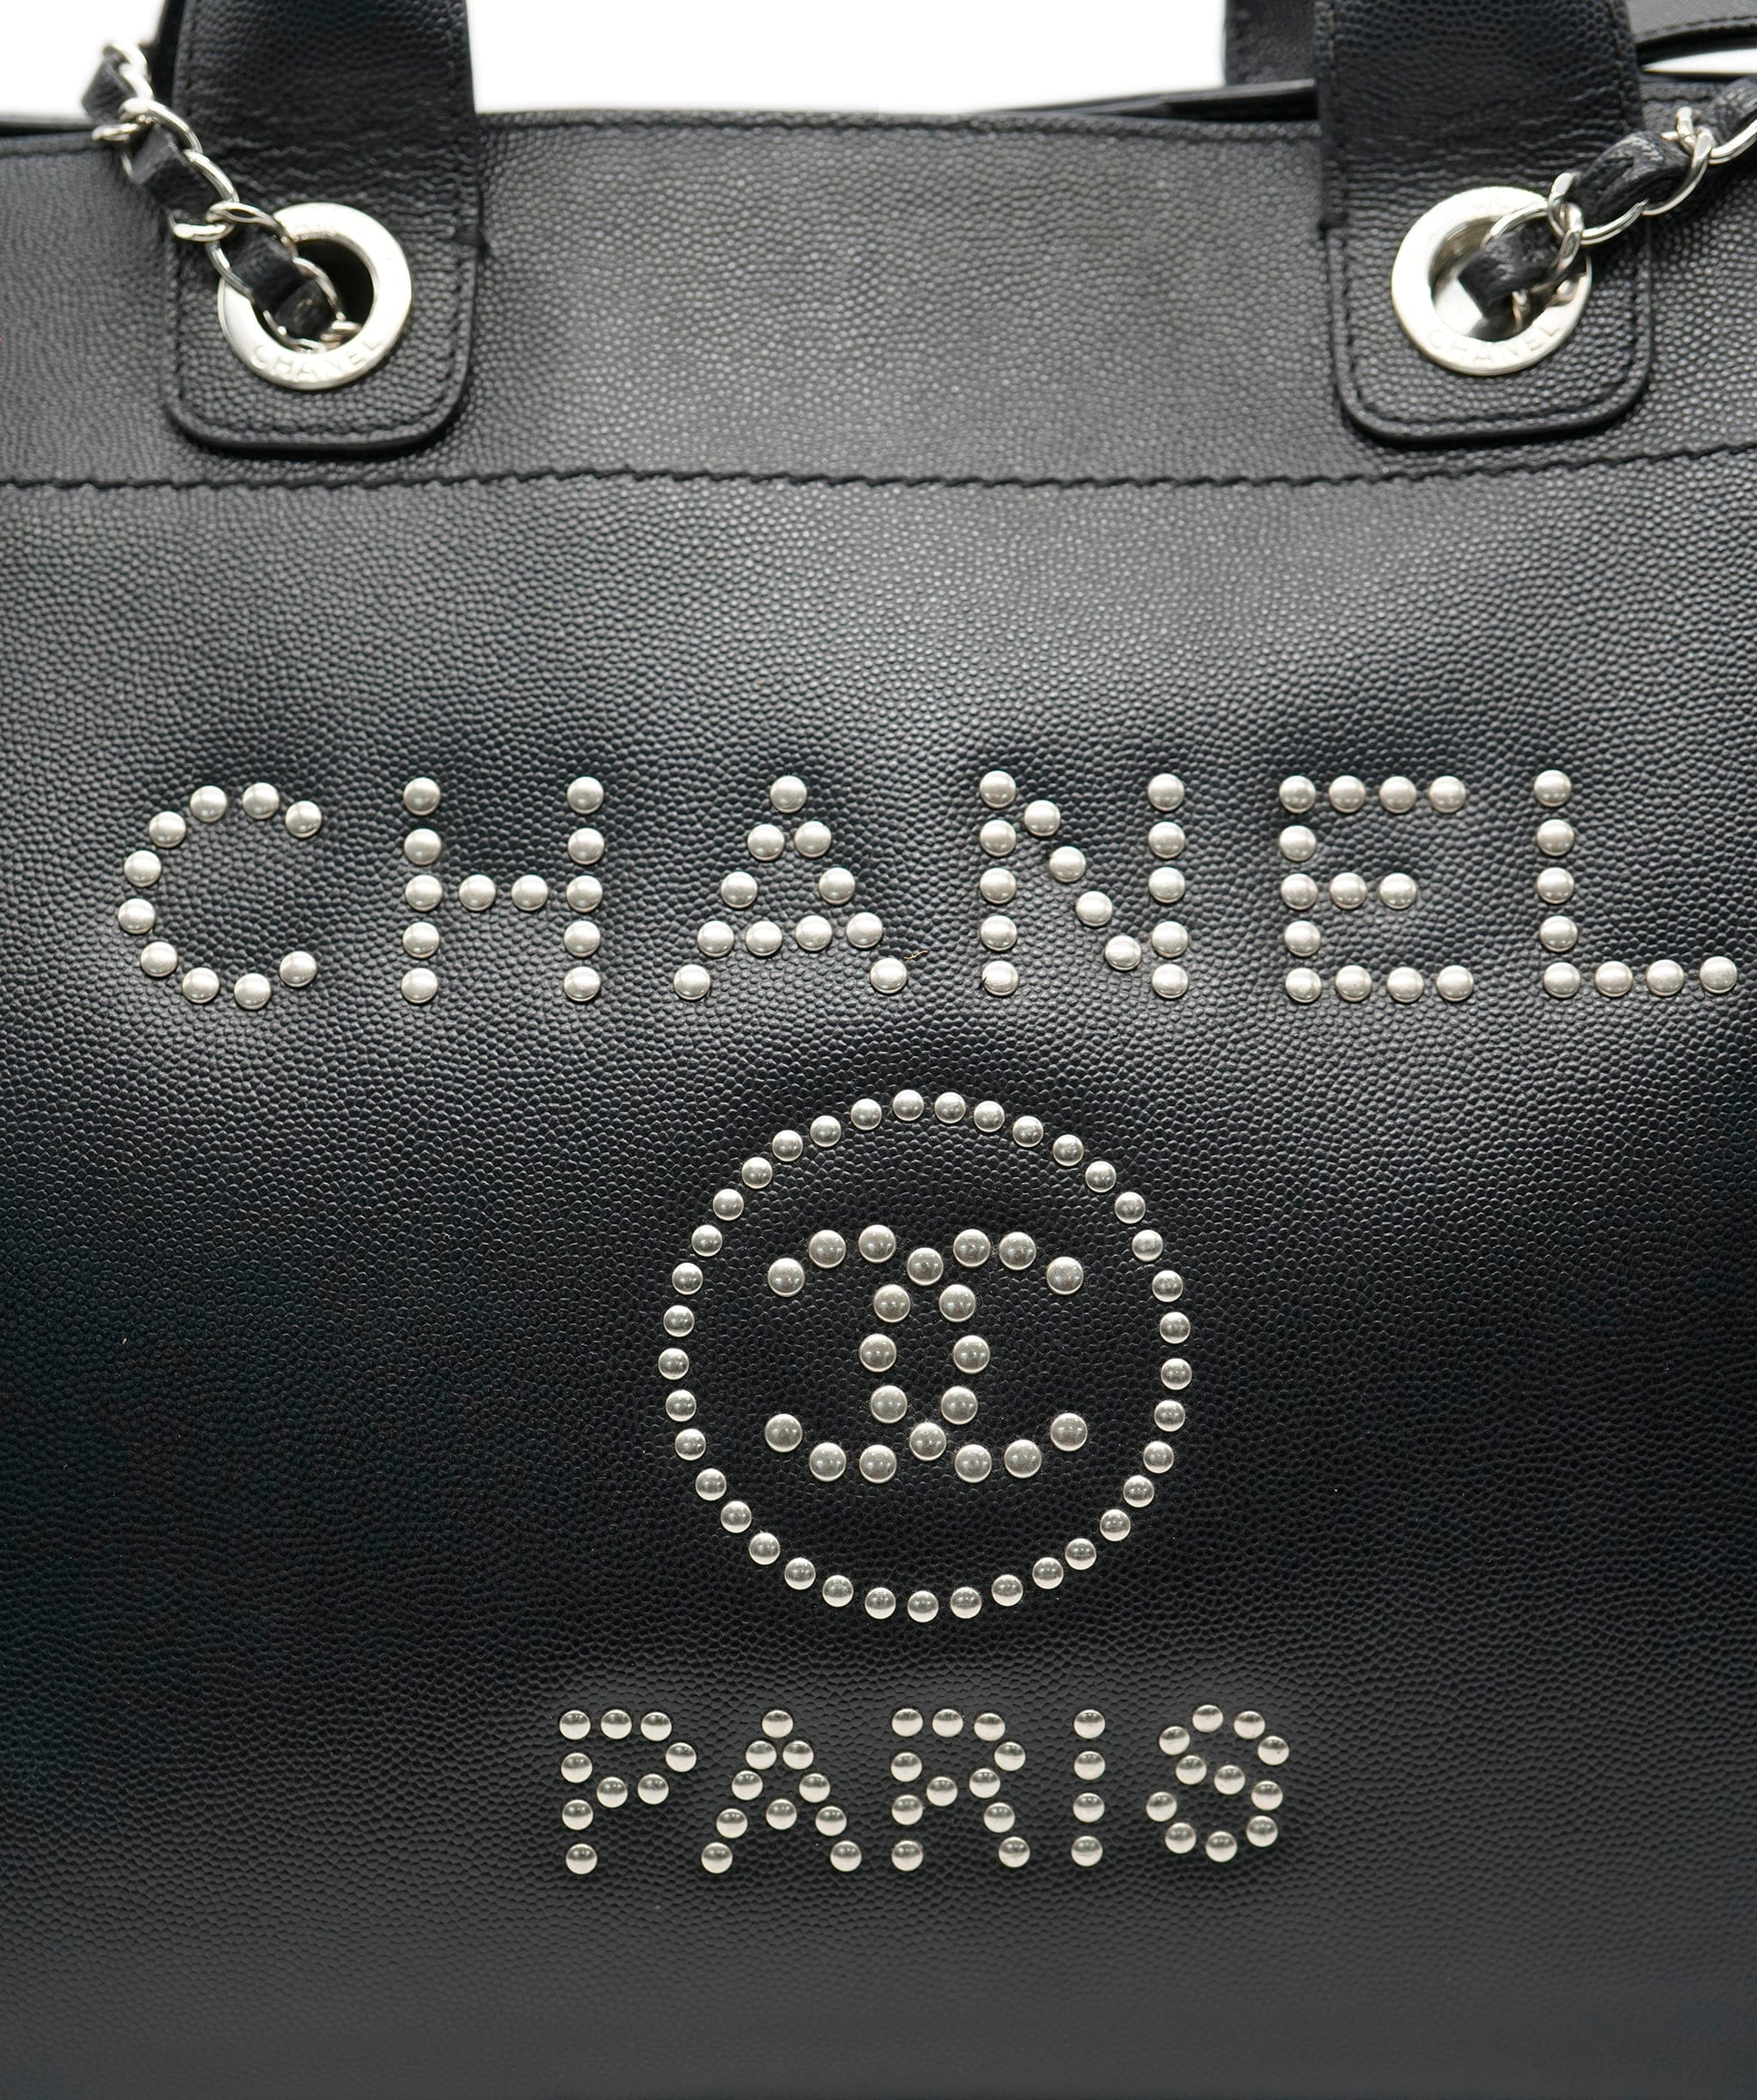 Chanel Chanel Leather Deuville Black Bag  ALC1308